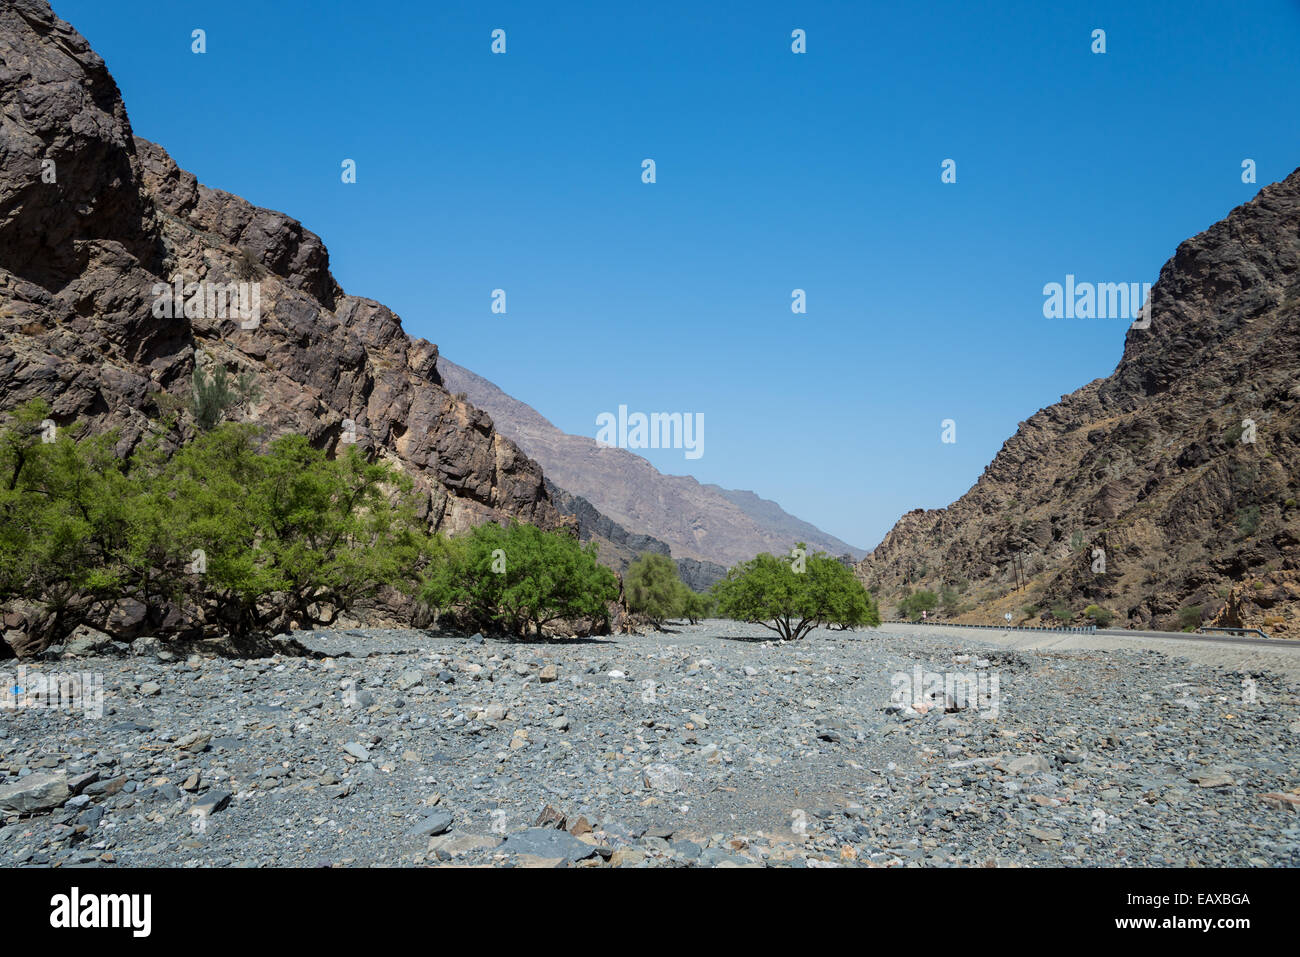 A dry river bed, wadi, in the mountain region. Oman. Stock Photo